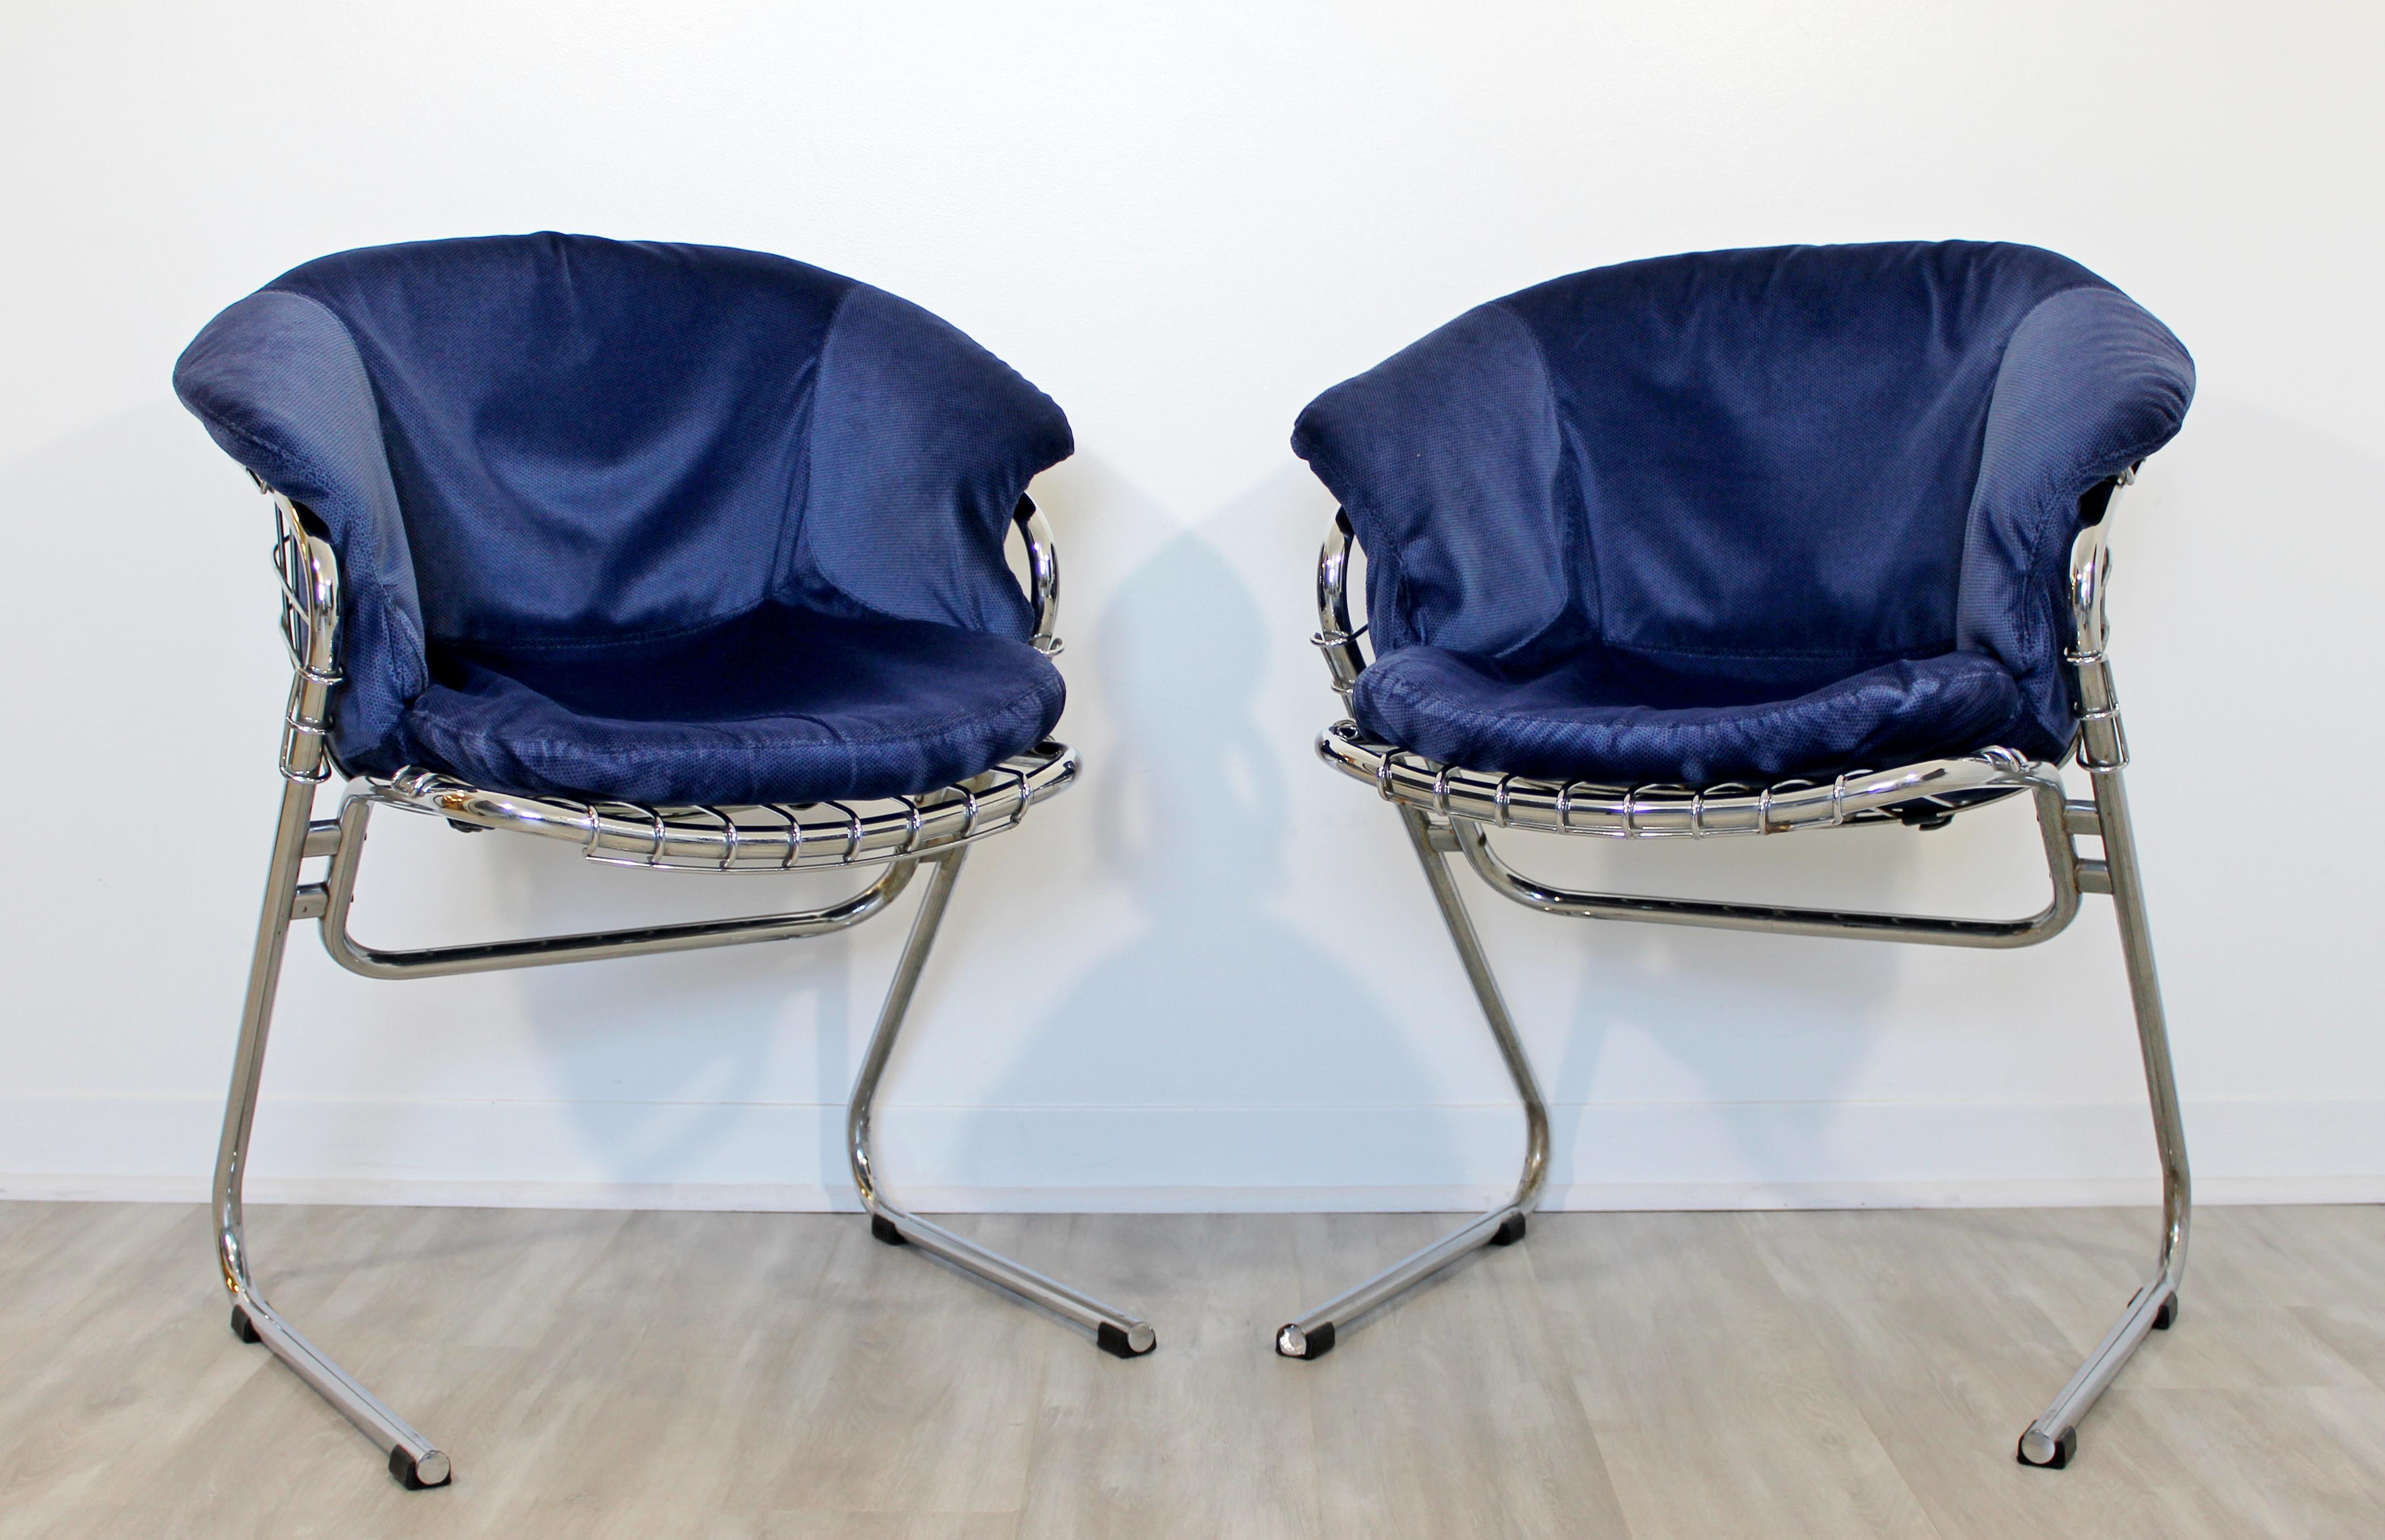 For your consideration is a marvellous pair of cantilevered chrome side lounge armchairs, by Gastone Rinaldi, circa the 1970s. In excellent vintage condition. The dimensions are 25